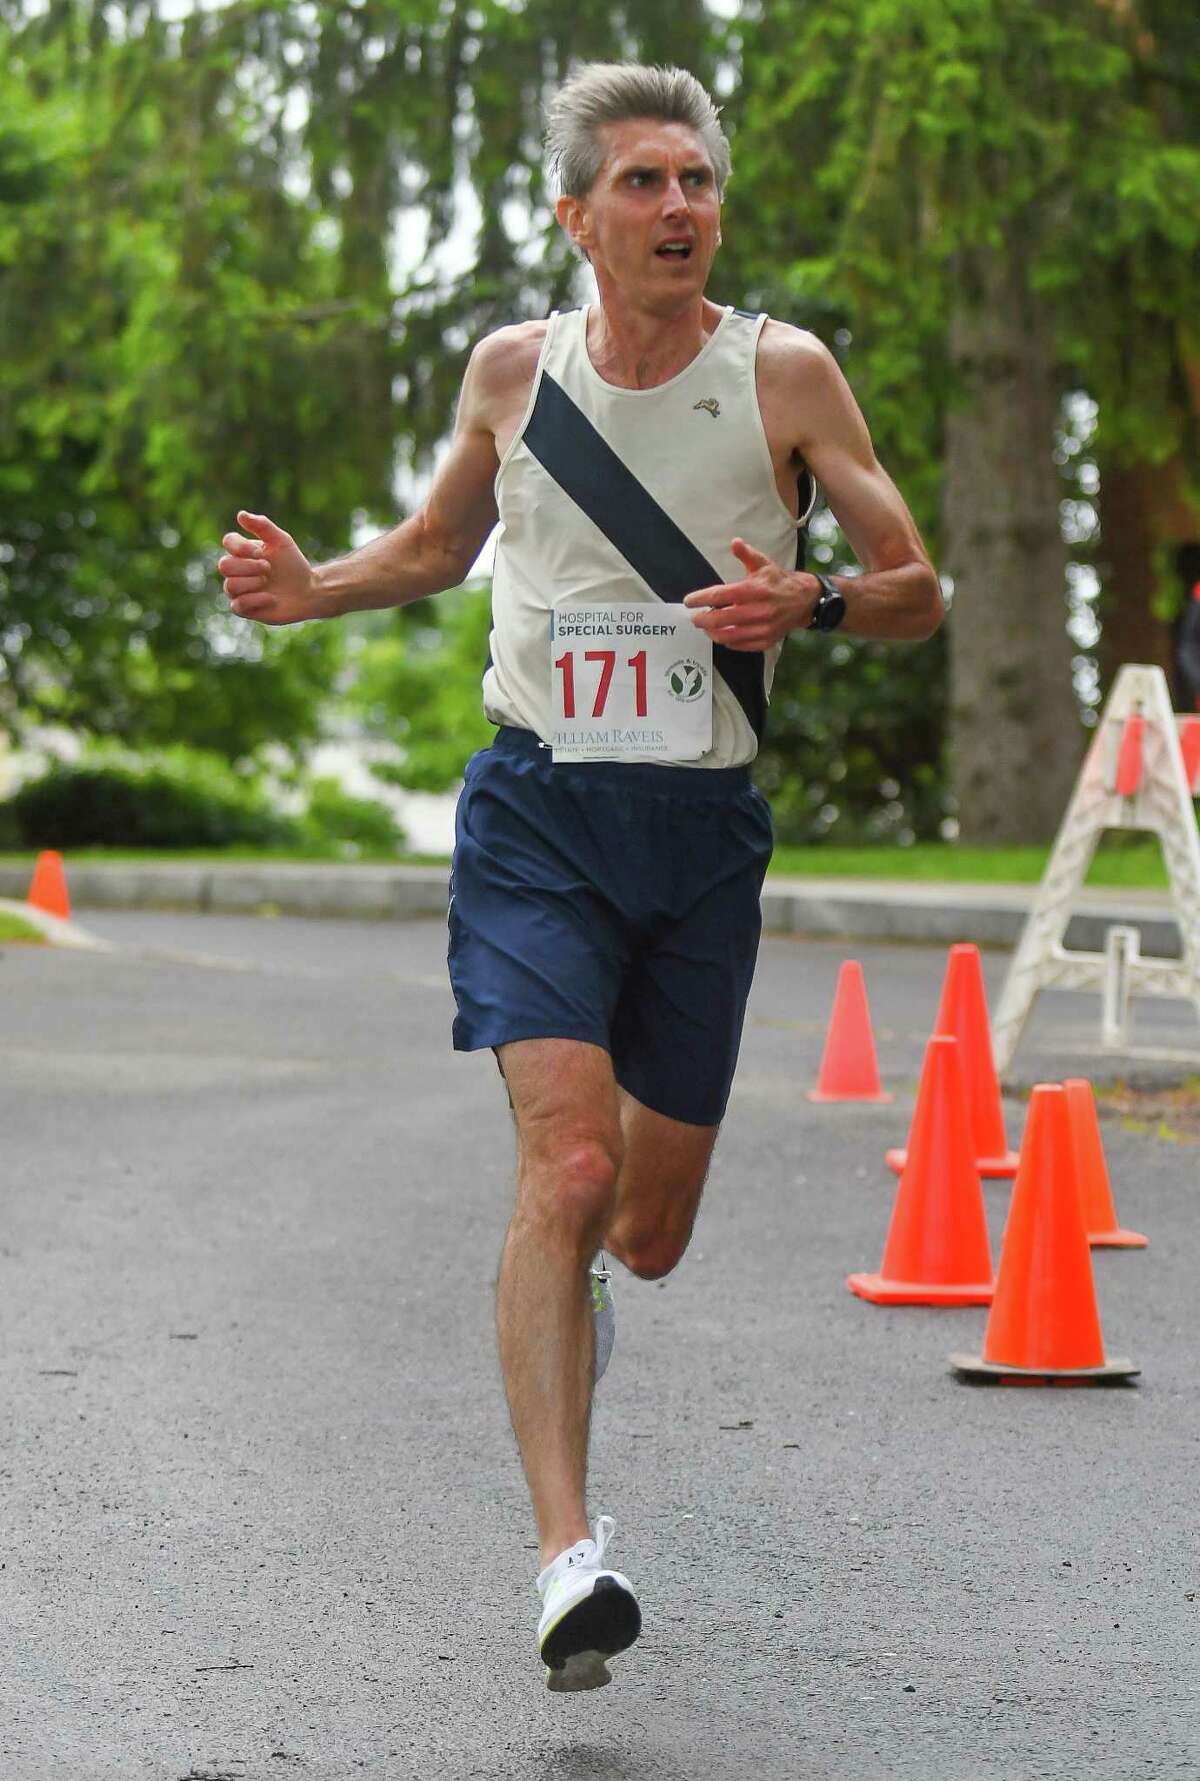 David Ott of Darien was the overall 2nd place finisher of the 53rd Annual Jim Fixx Memorial Day Race on May 29, 2017 in Greenwich, Connecticut.